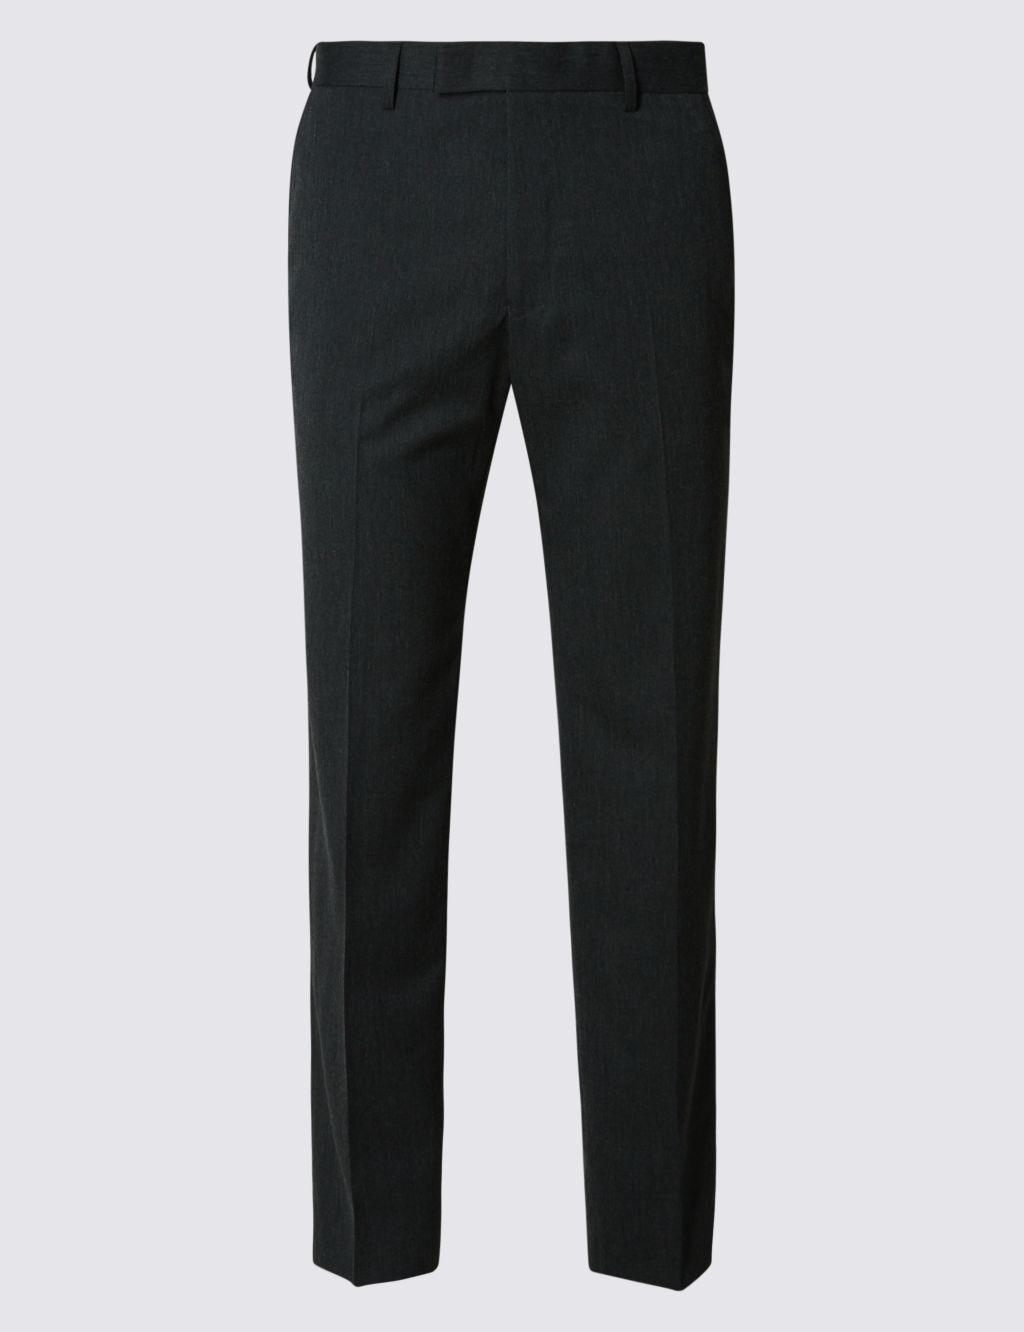 Charcoal Tailored Fit Trousers 1 of 5